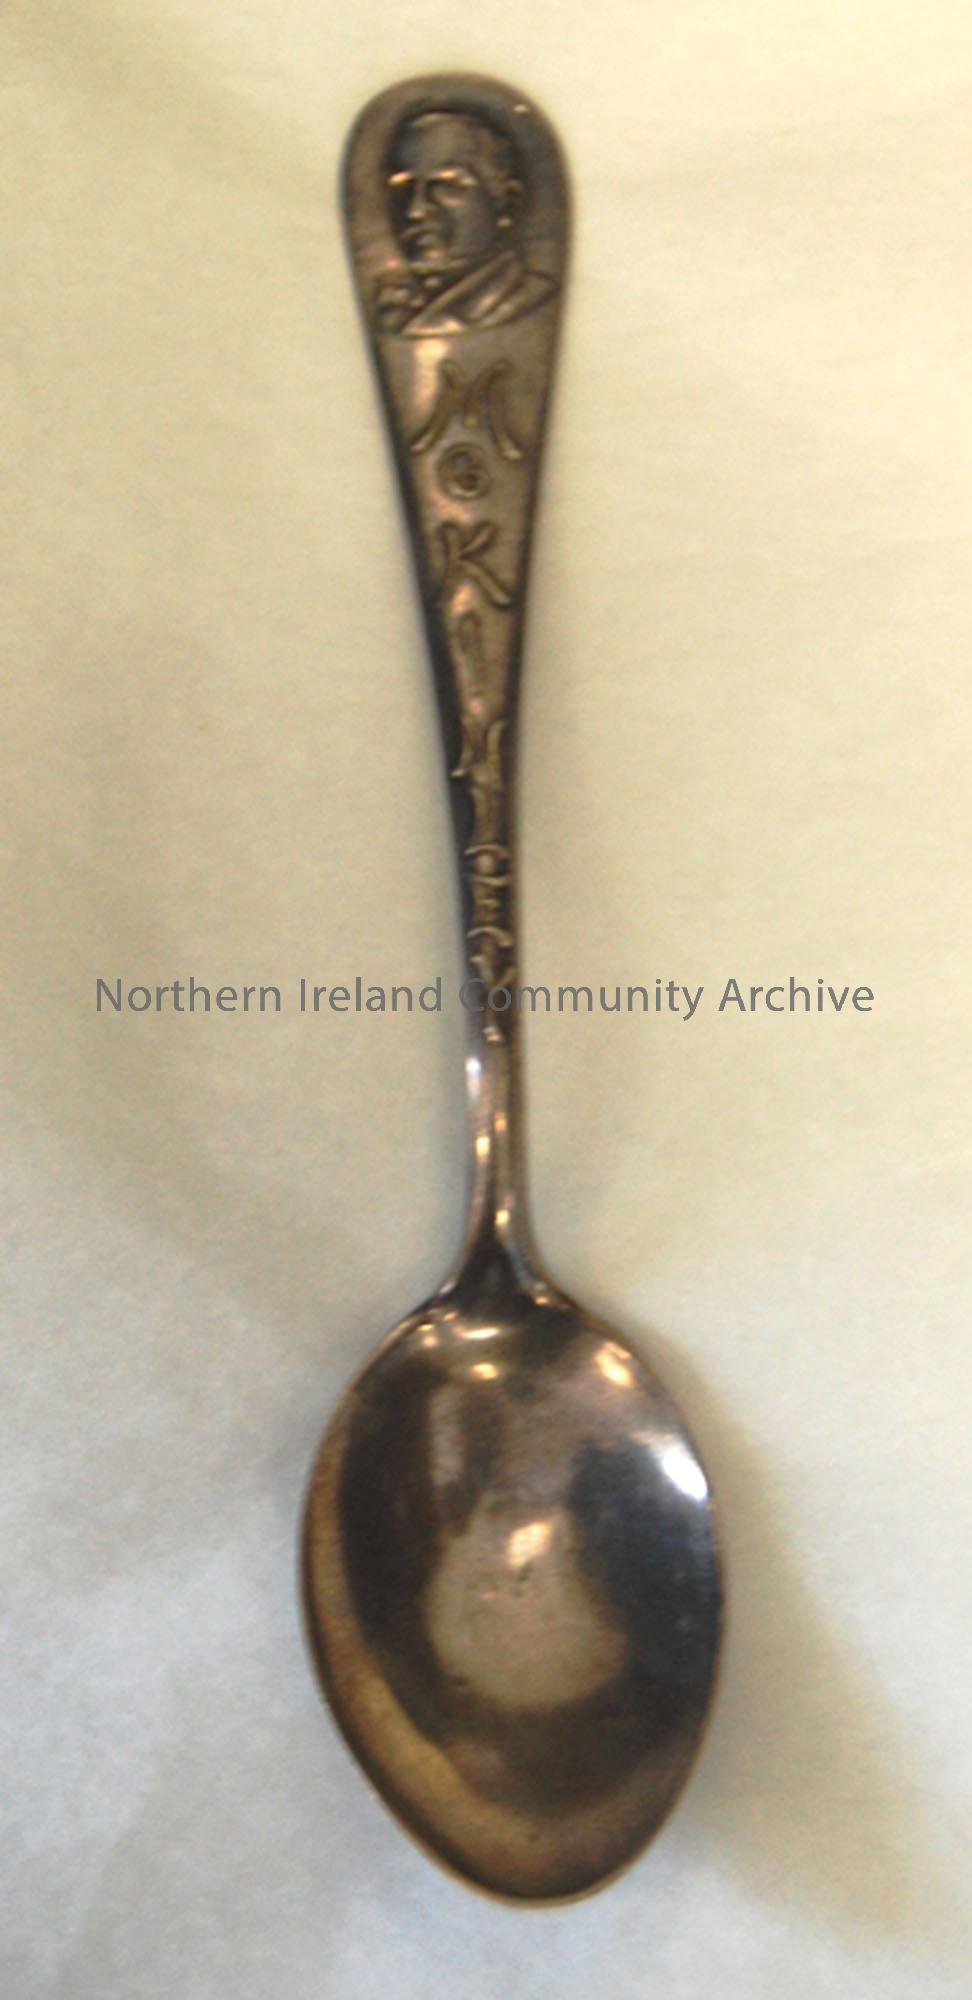 Spoon embossed with McKinley’s head and name on front, dated October 20-02 on reverse; sterling silver.